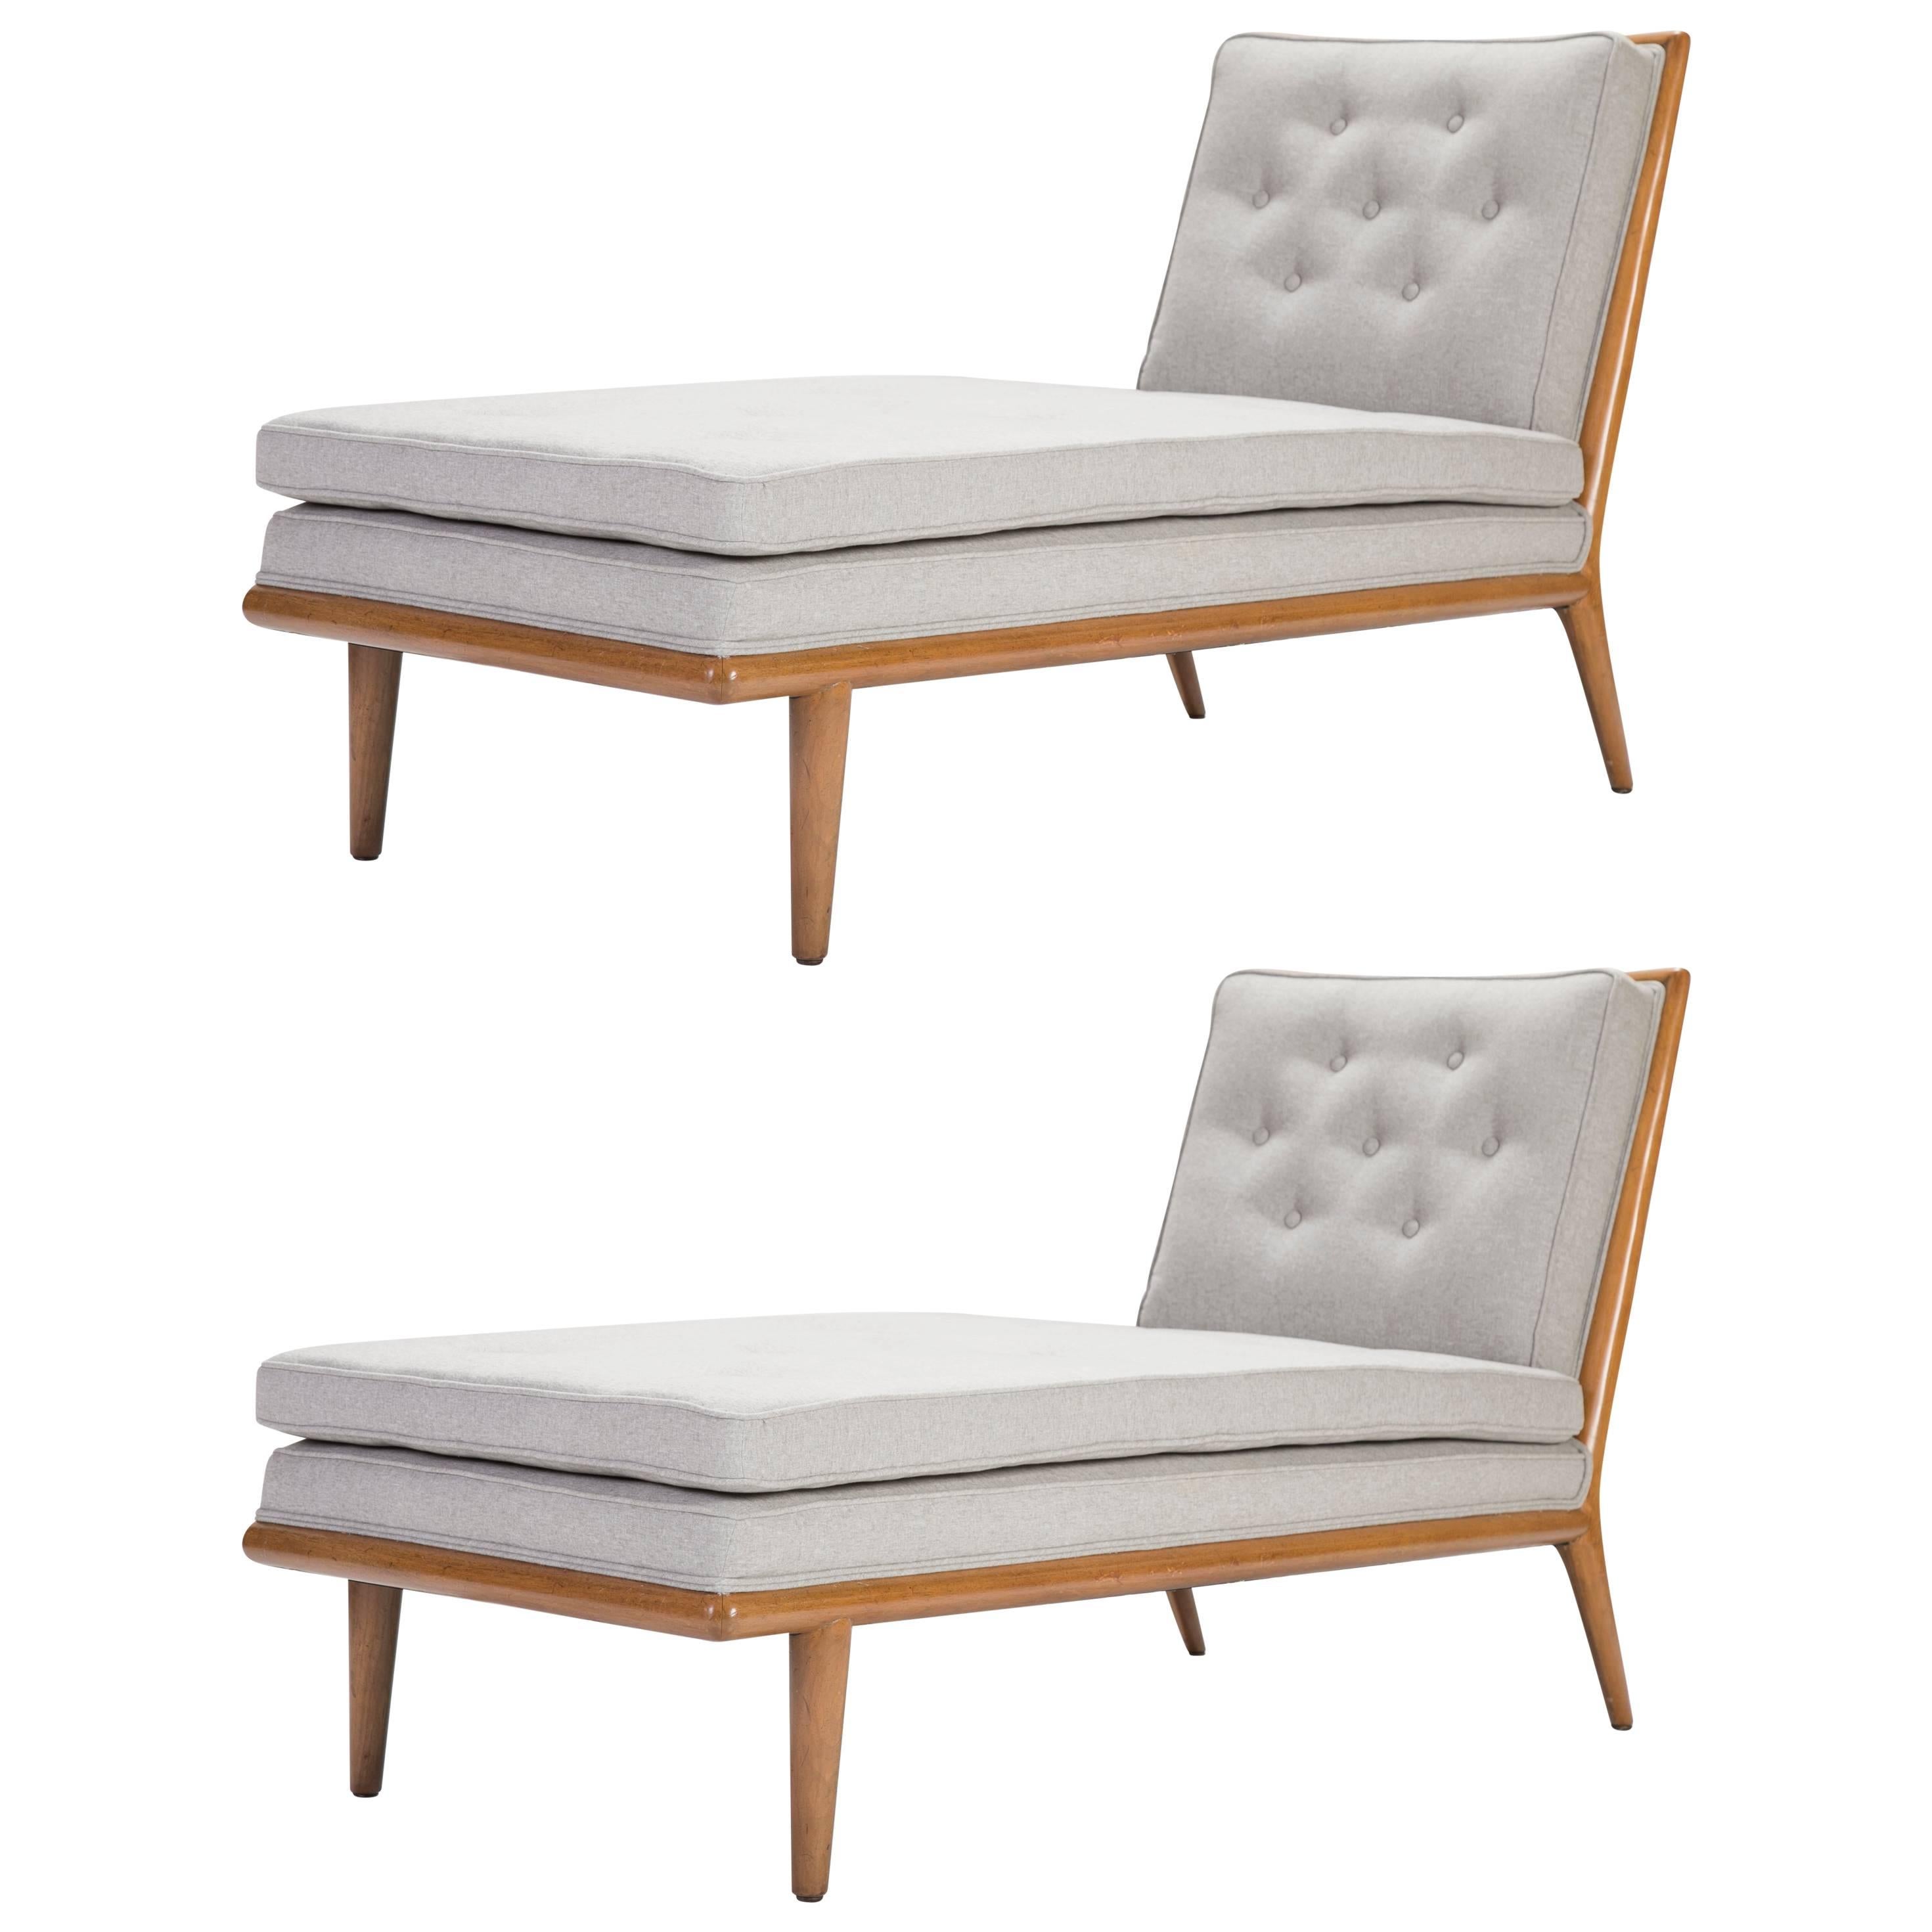 Pair of Walnut Daybeds Designed by T.H. Robsjohn-Gibbings